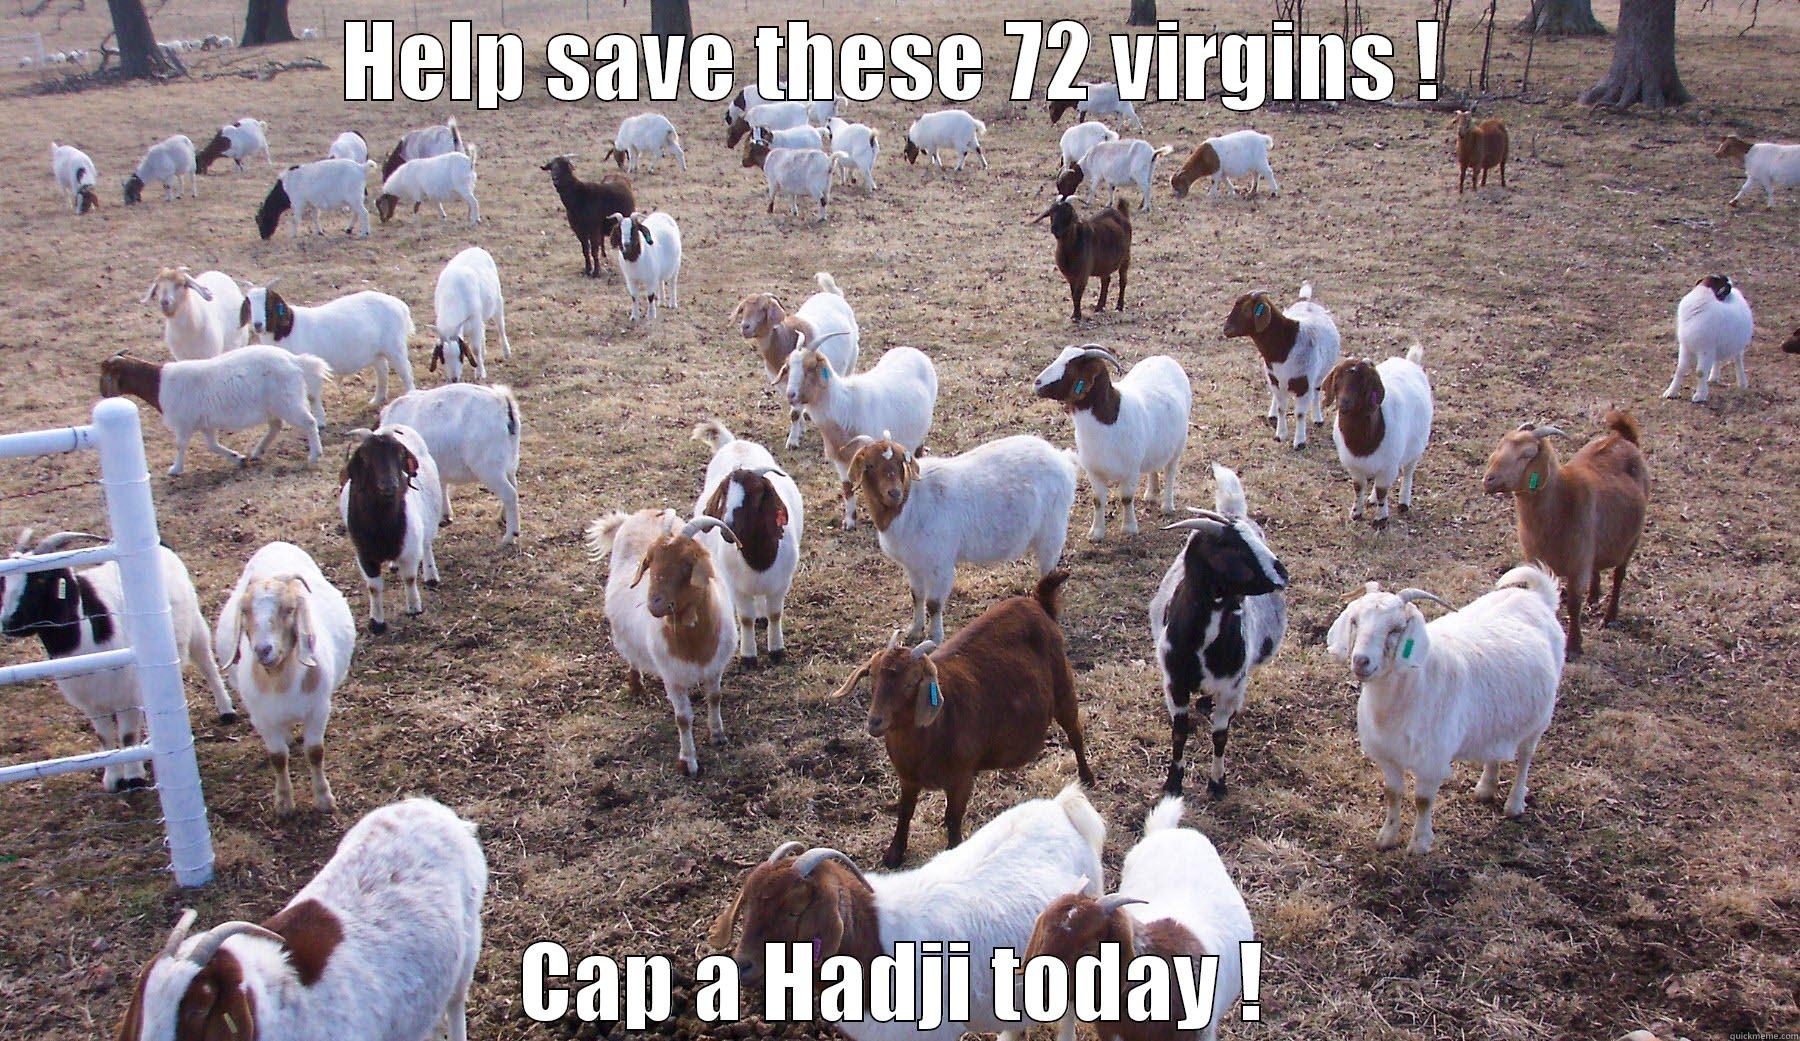 ISIS Sex Camp - HELP SAVE THESE 72 VIRGINS ! CAP A HADJI TODAY ! Misc